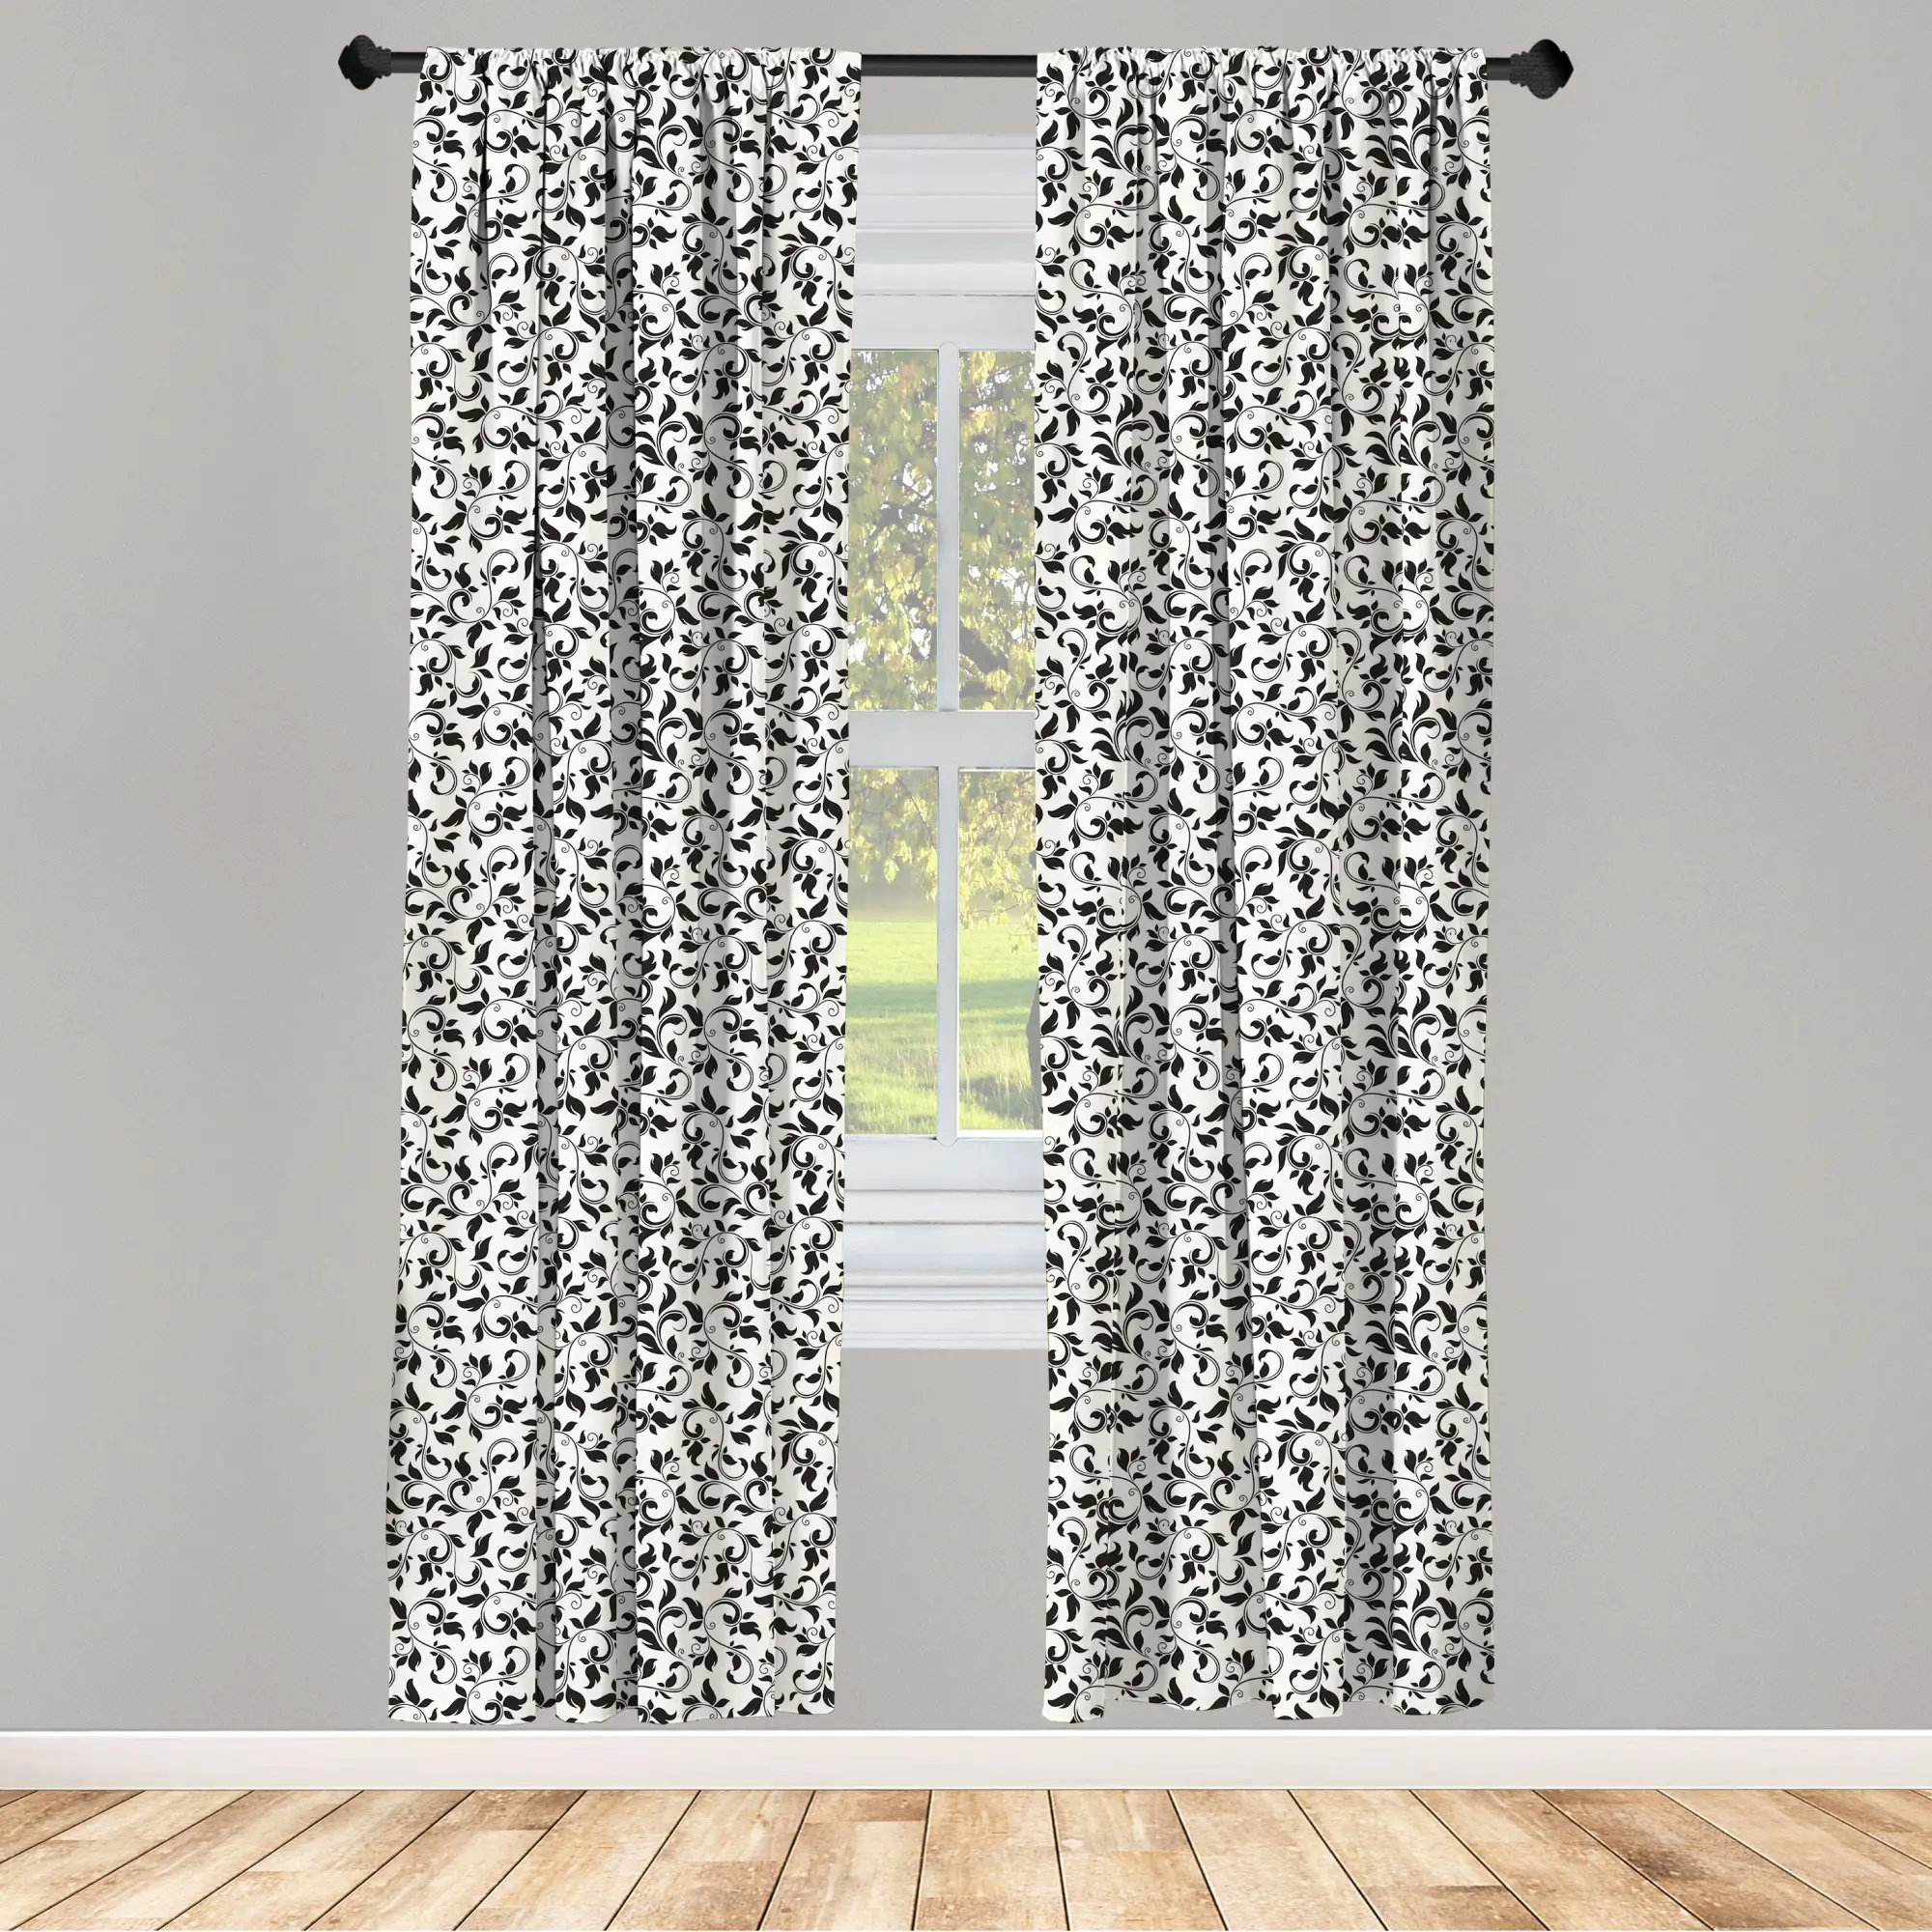 Branch Printed Home Blackout Curtains Living Bedroom Windows Decor Drapes 